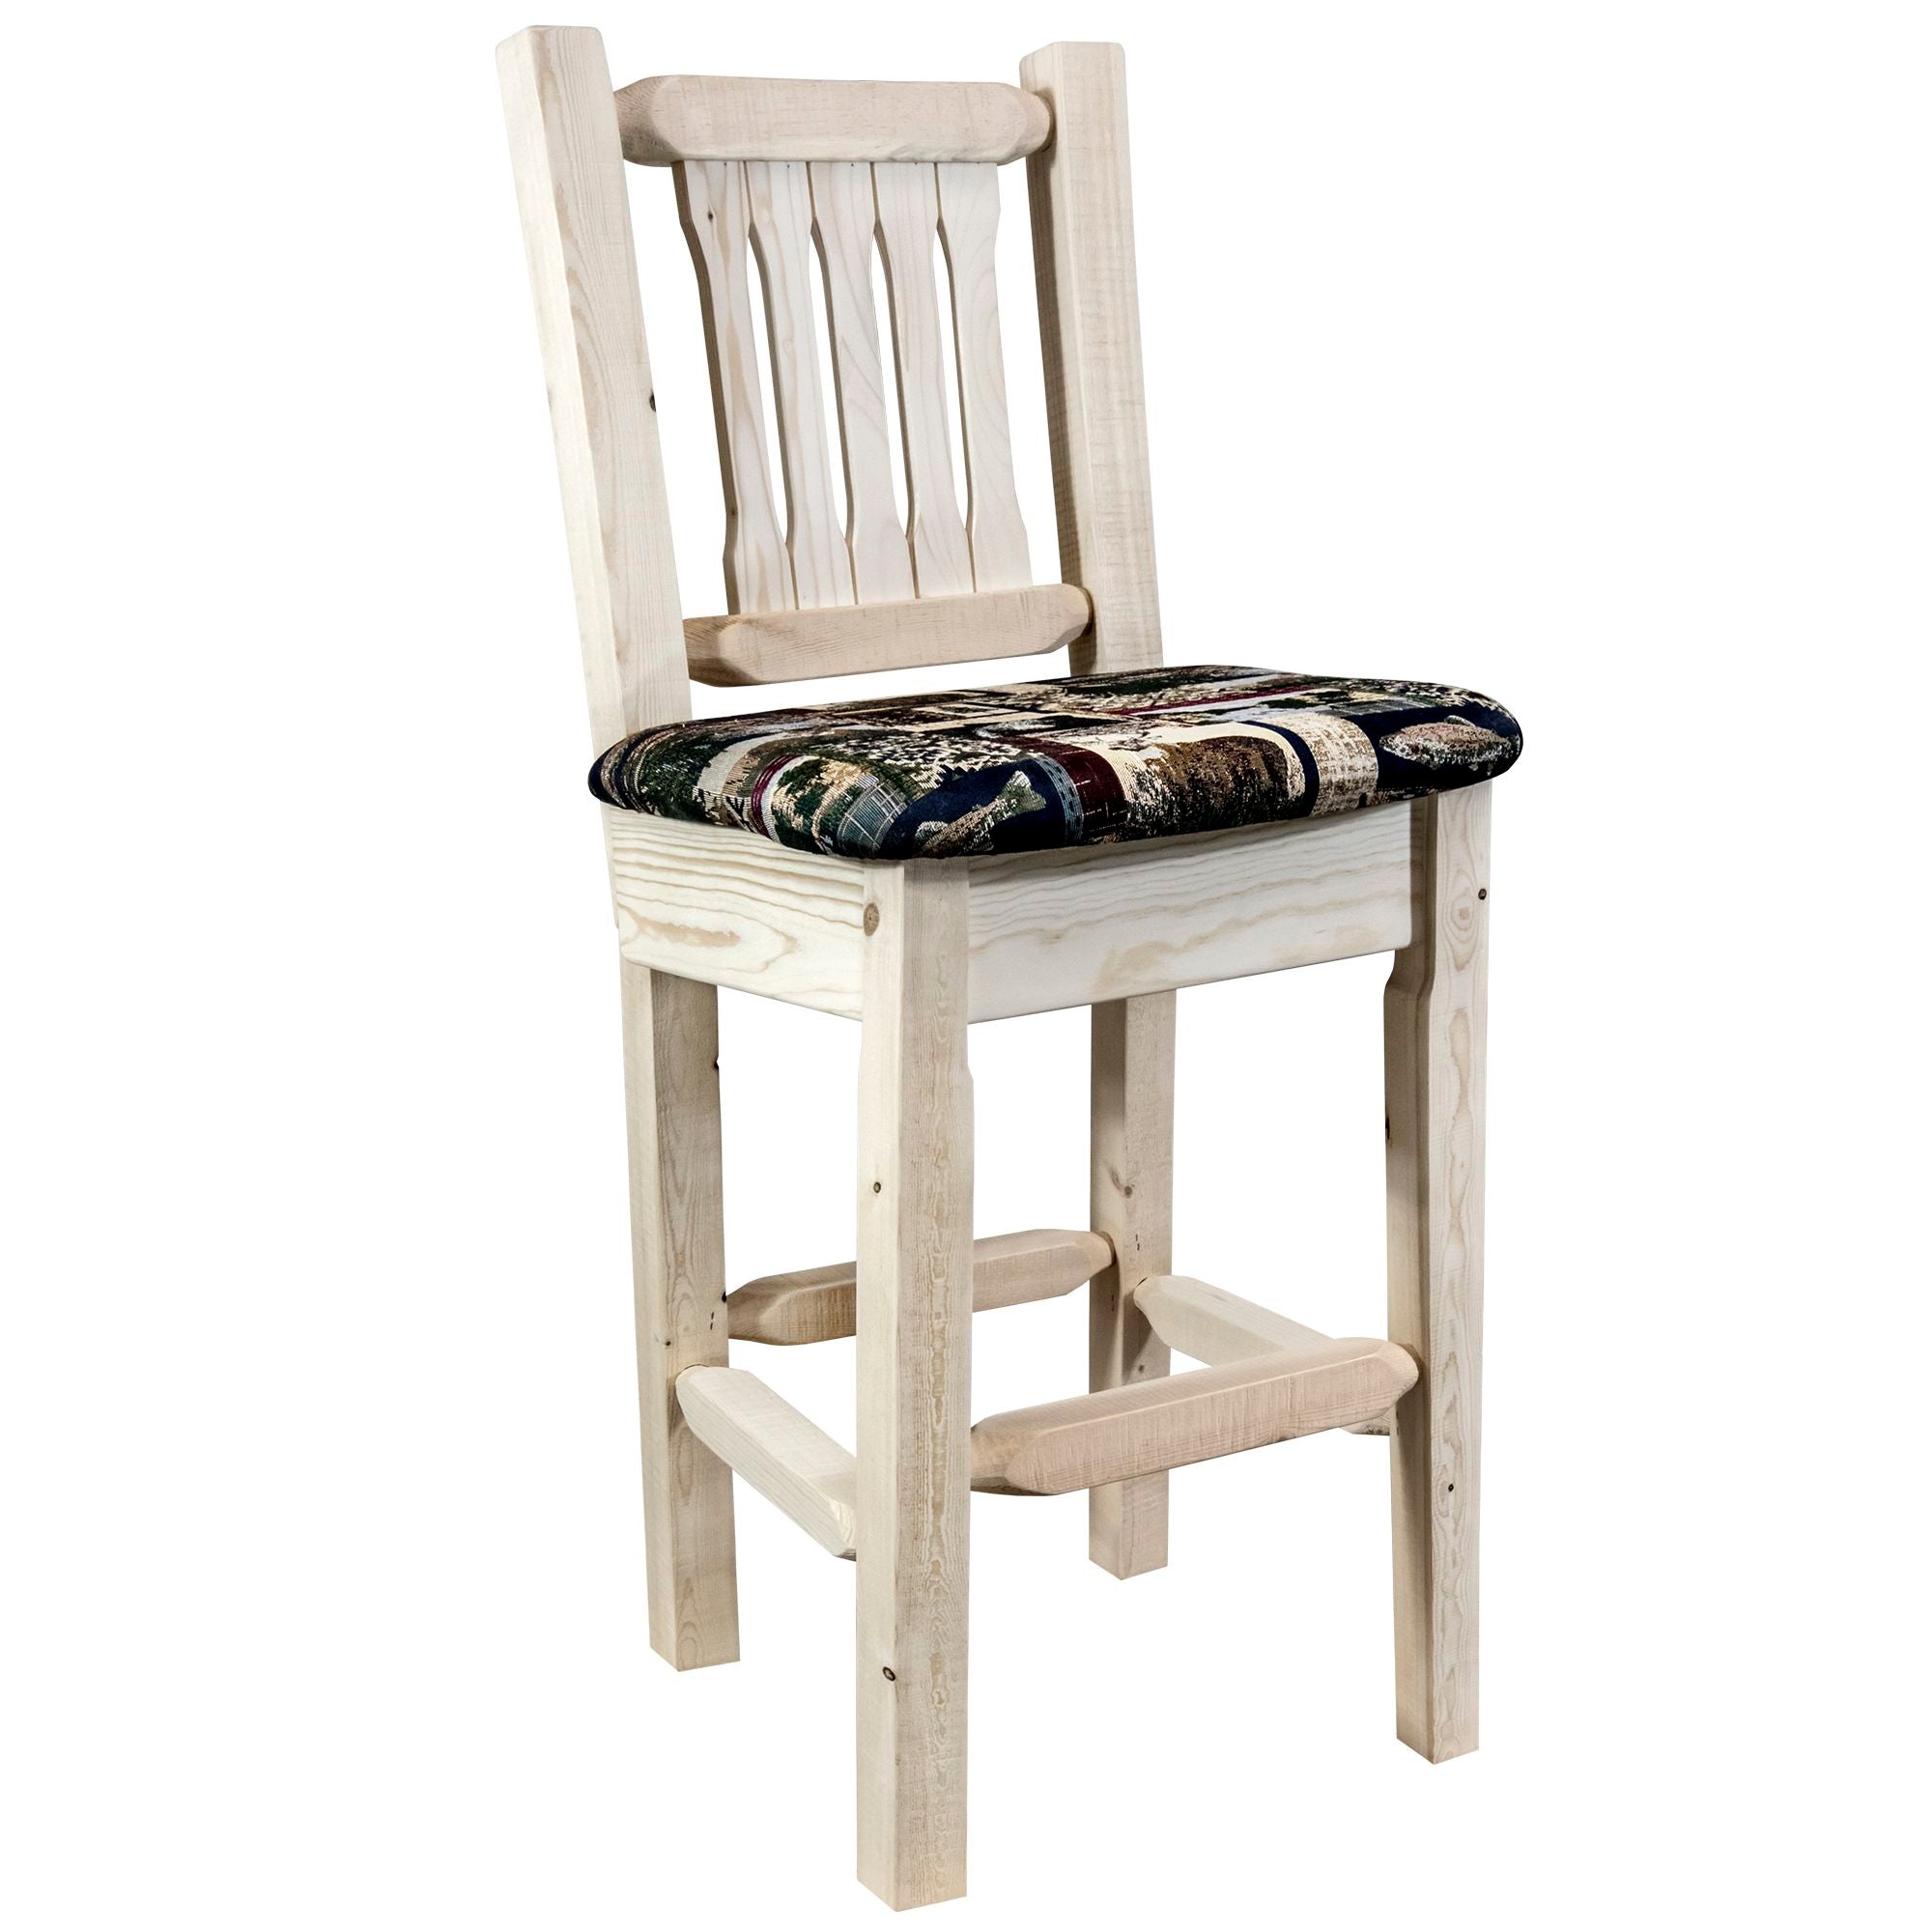 Montana Woodworks Homestead Collection Barstool w/ Back and w/ Upholstered Seat, Woodland Pattern